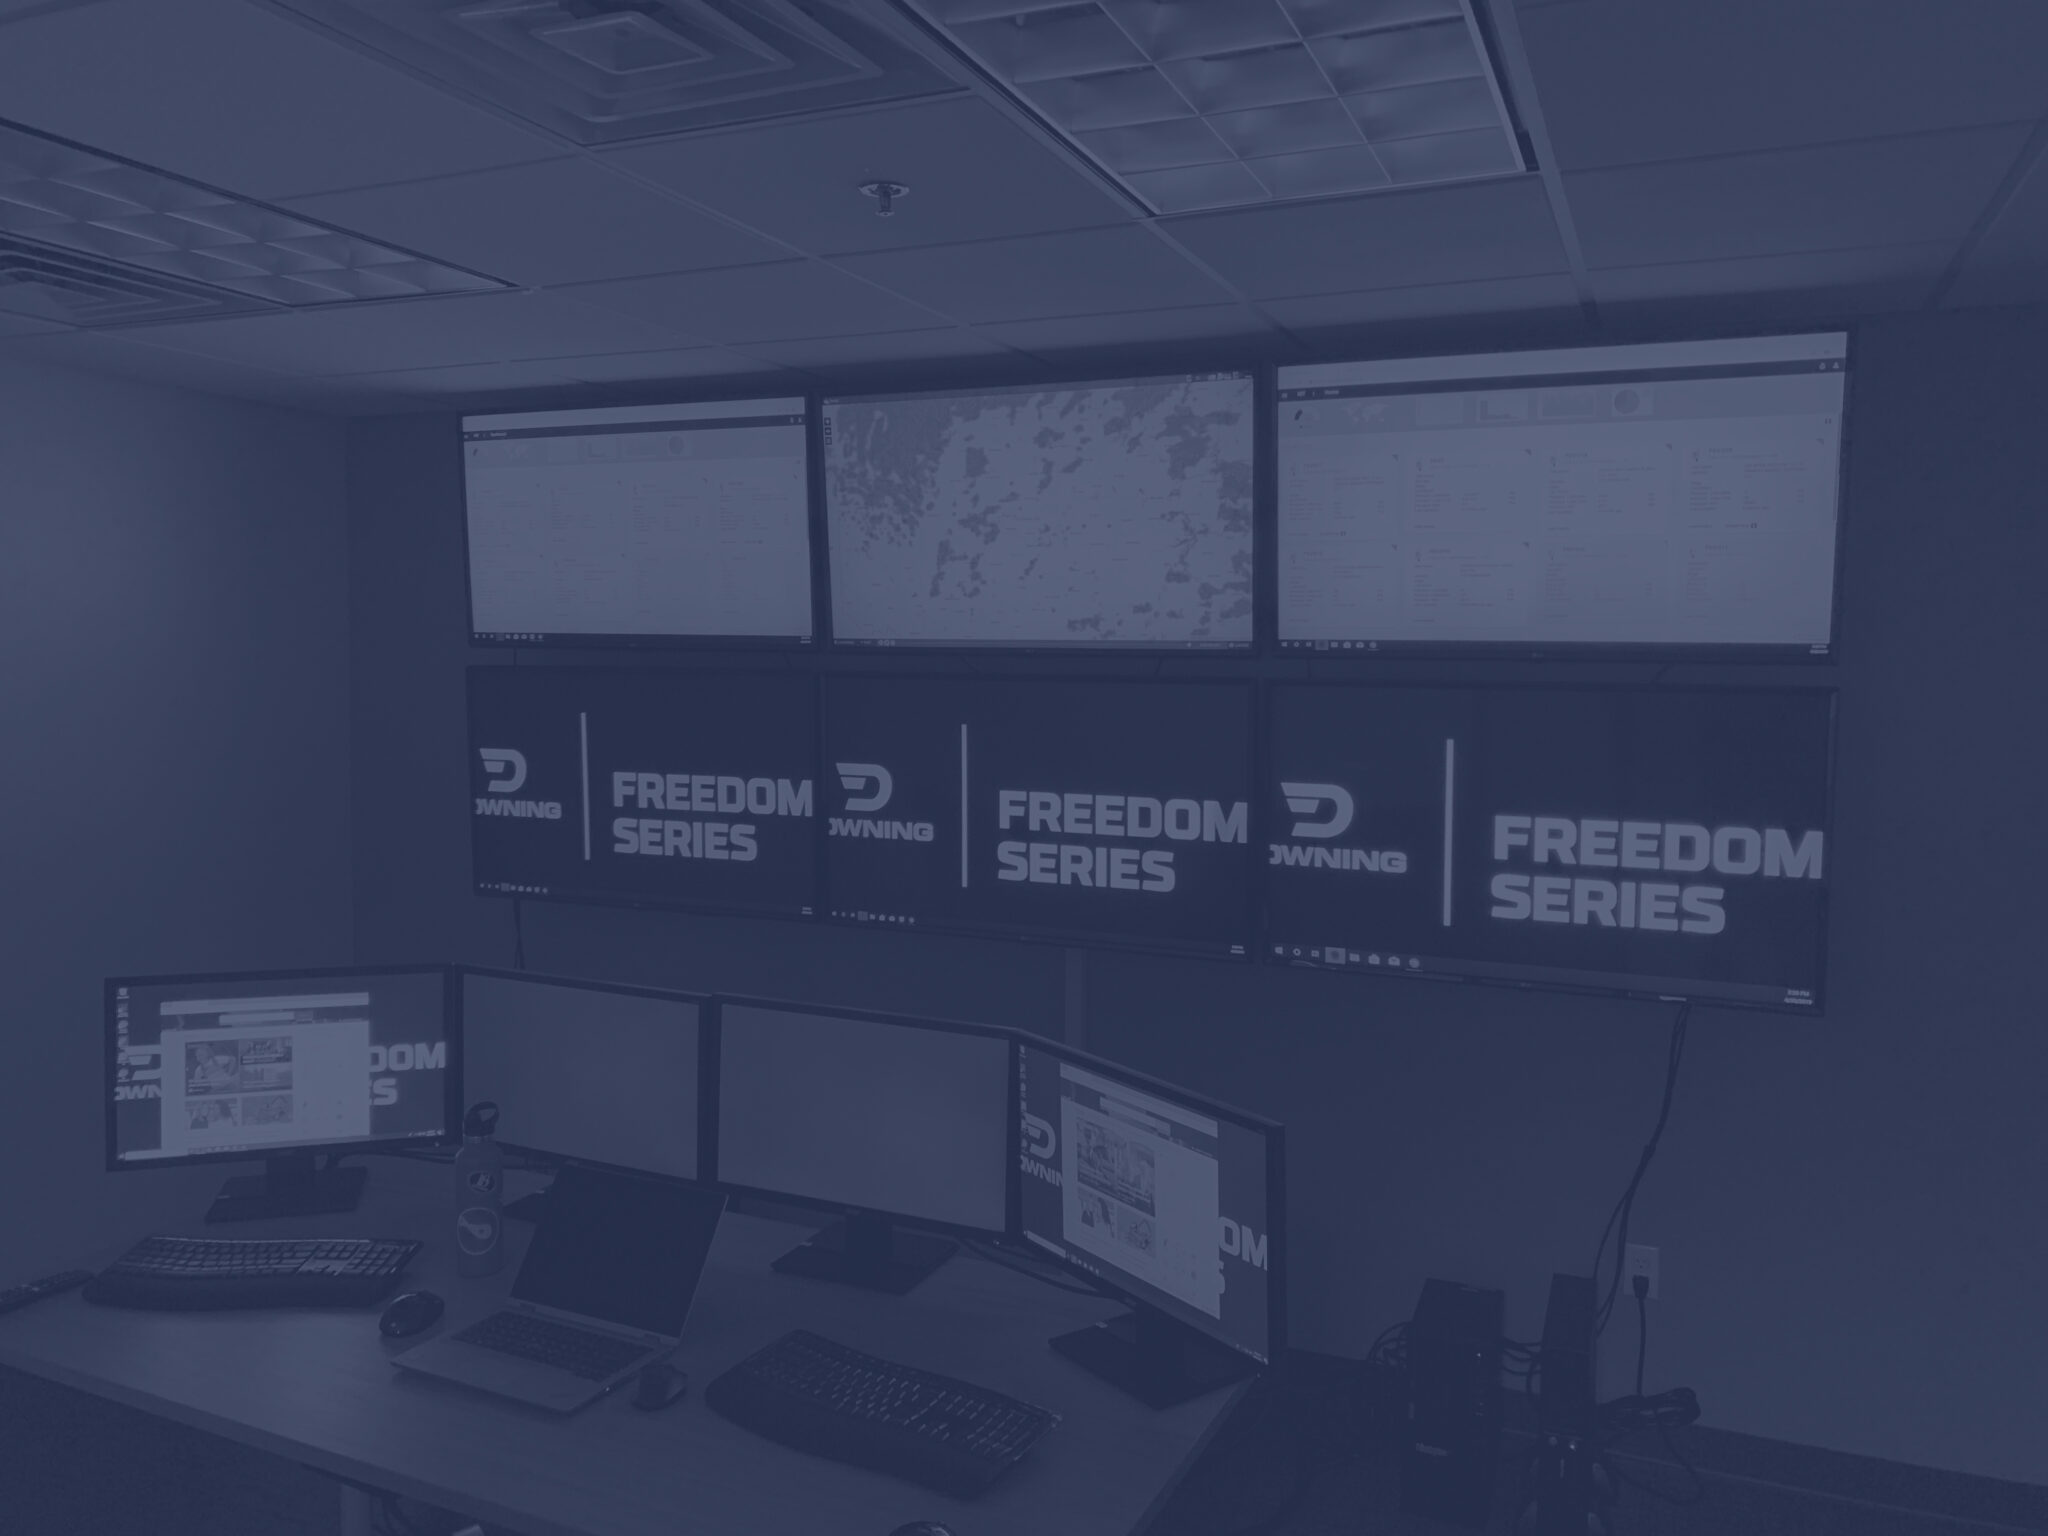 Freedom Series control center with blue overlay